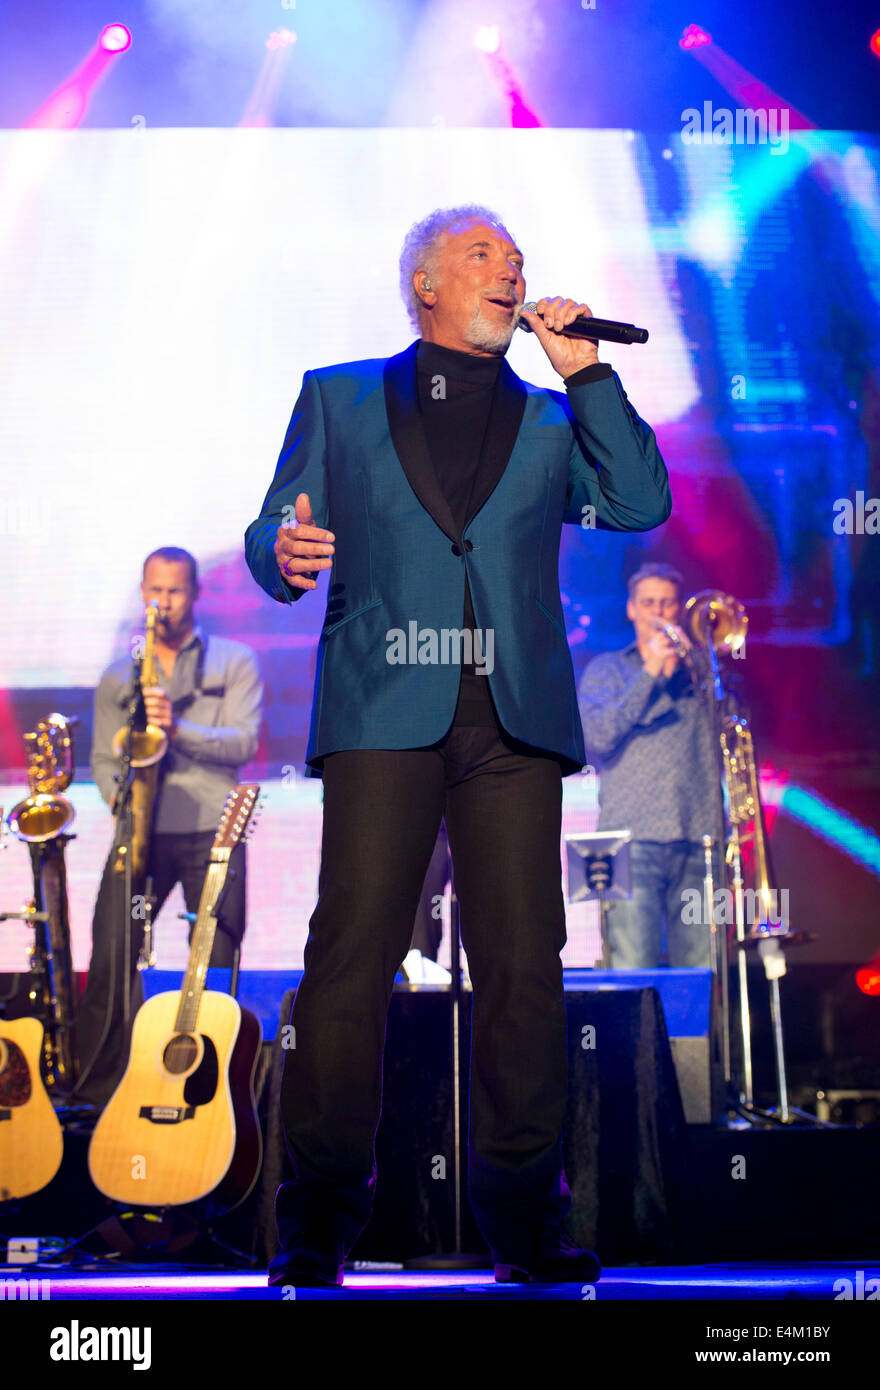 Welsh singer Tom Jones performs at Chepstow Racecourse in South Wales. Stock Photo